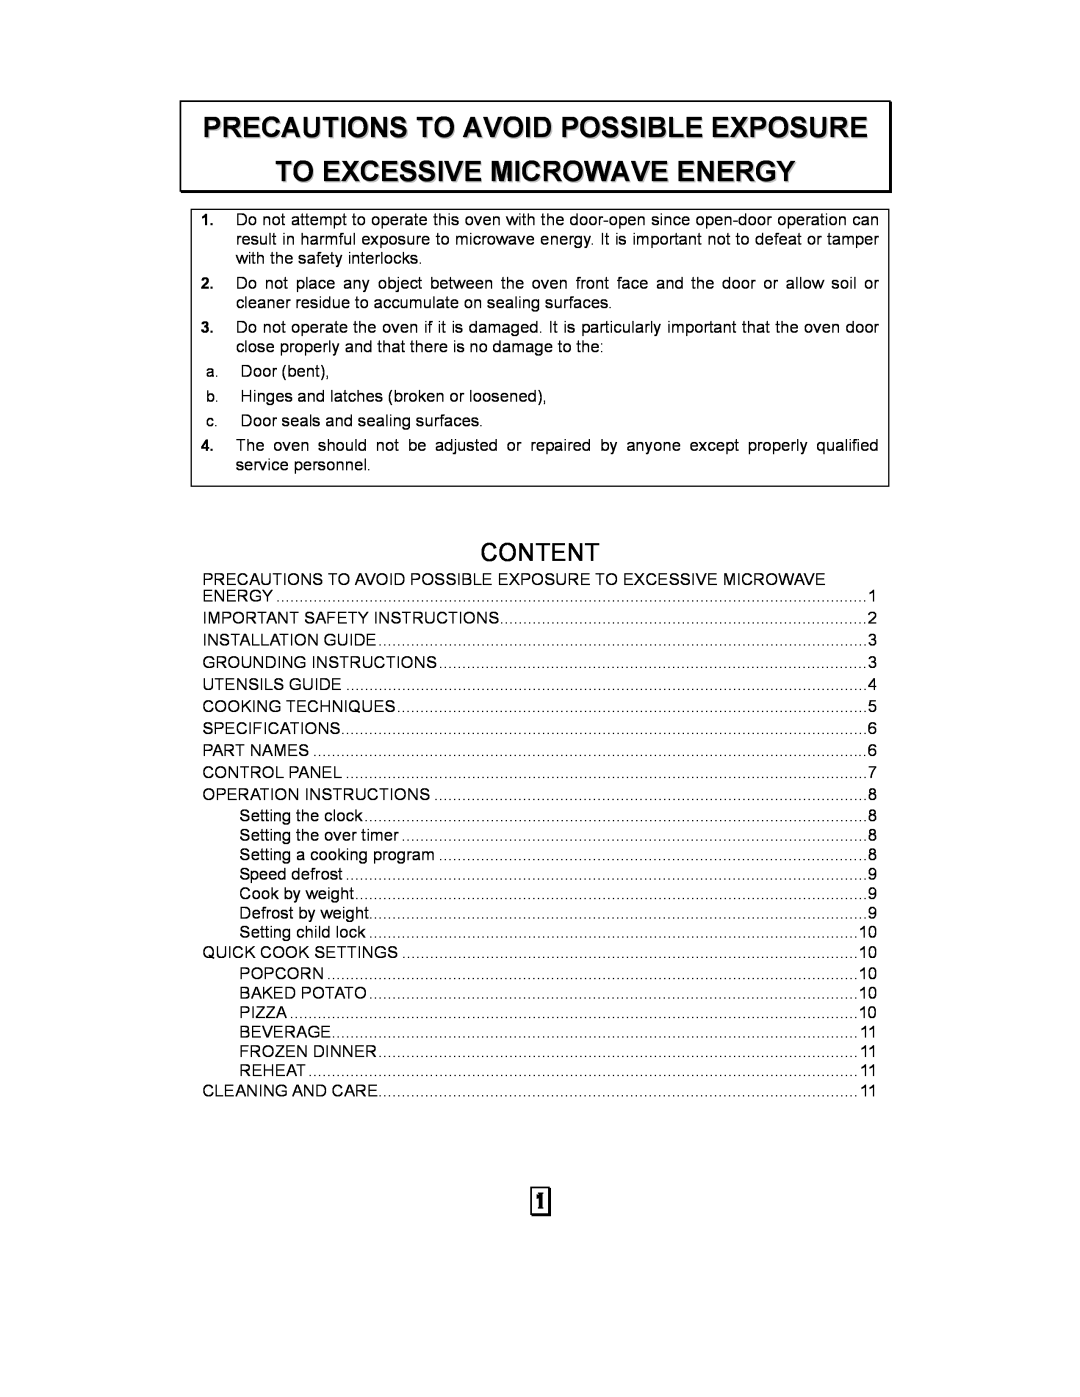 Kenmore 87043 owner manual Precautions To Avoid Possible Exposure To Excessive Microwave Energy, Content 